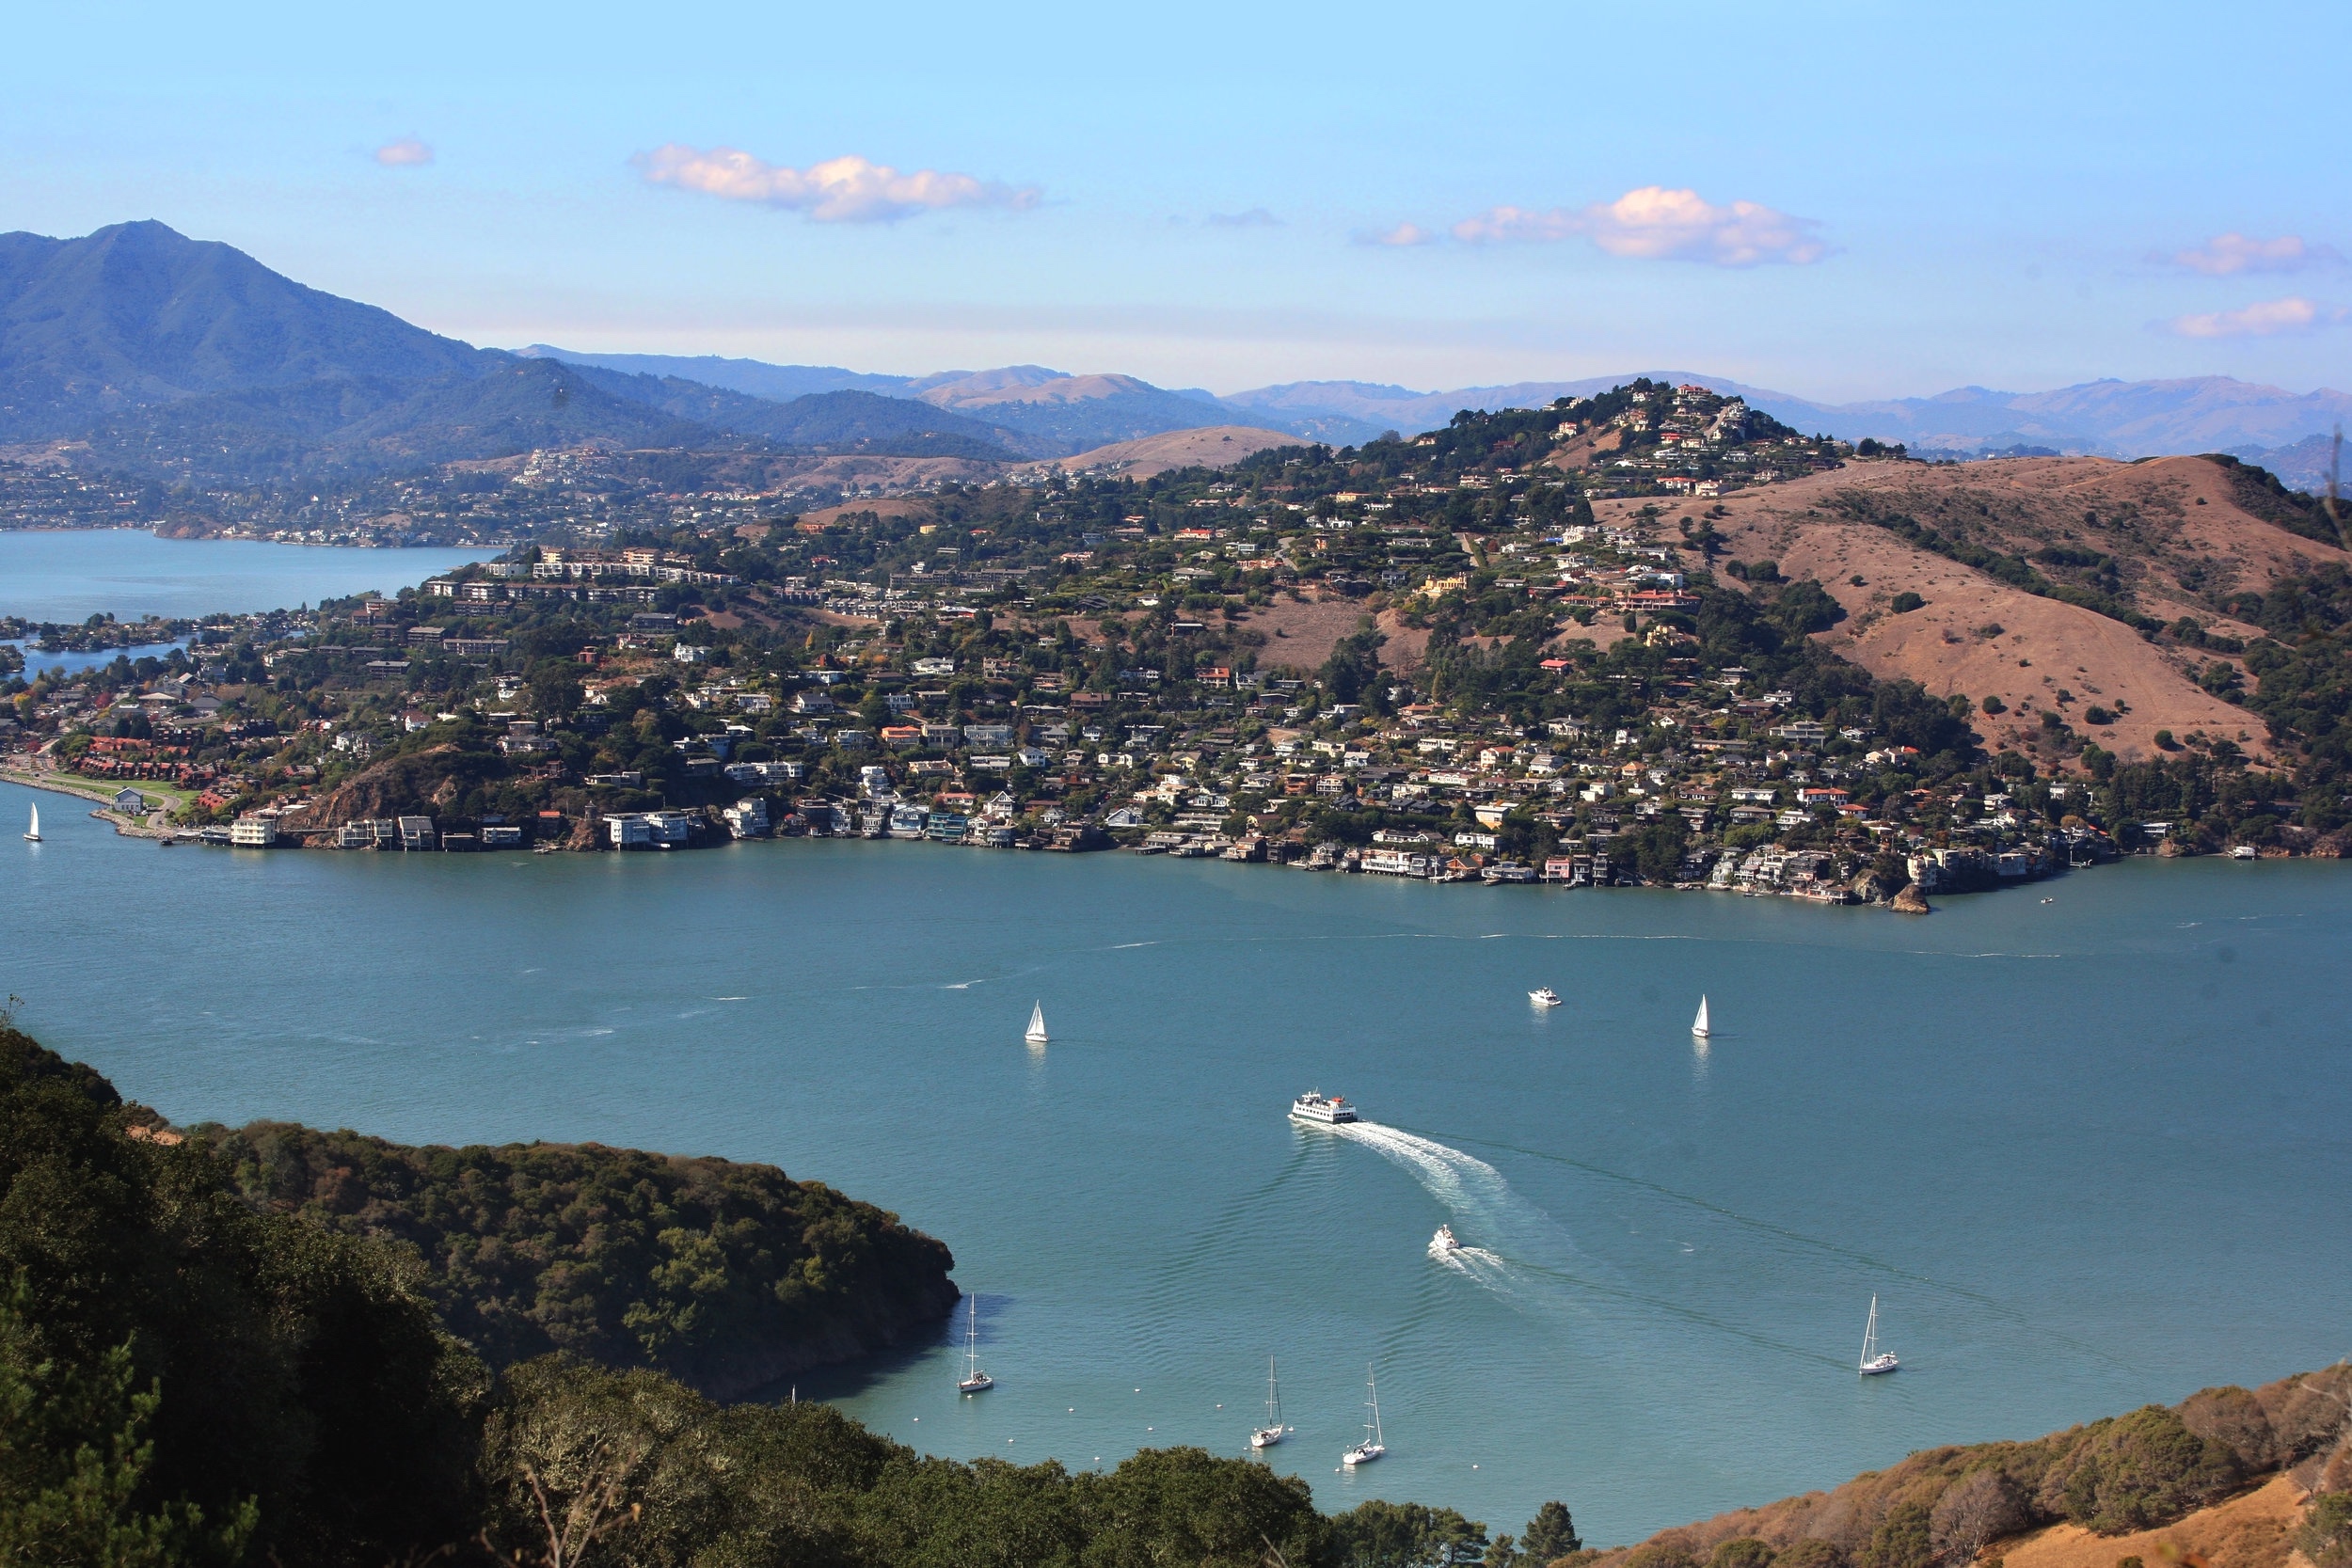  The beautiful town of Tiburon in Marin County is immersed in natural beauty, surrounded by the San Francisco Bay, and topped off by views of Mt. Tamalpais. 